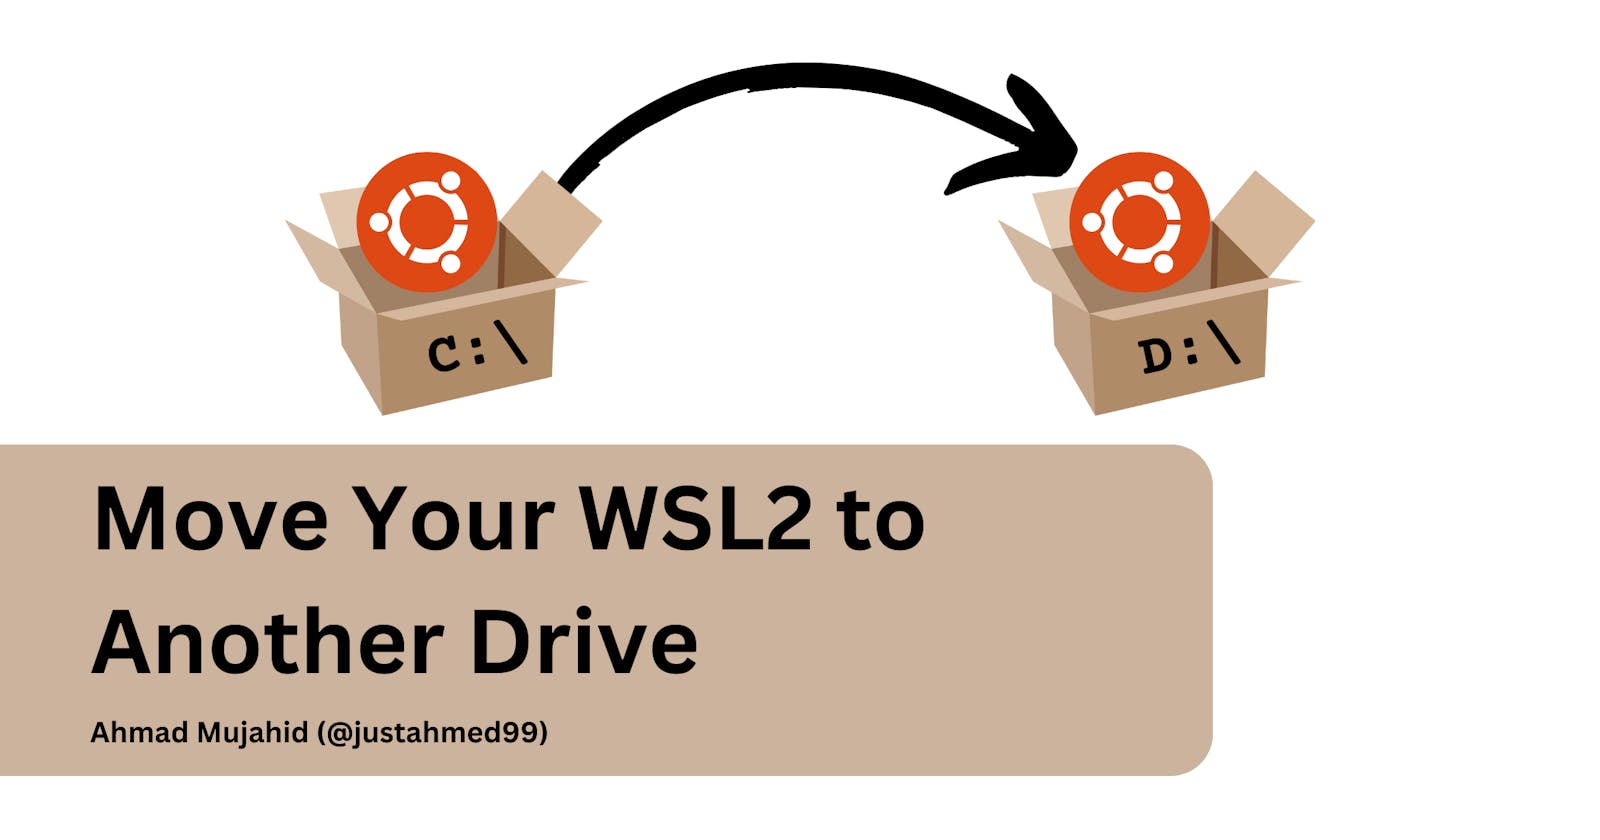 Move Your WSL2 to Another Drive